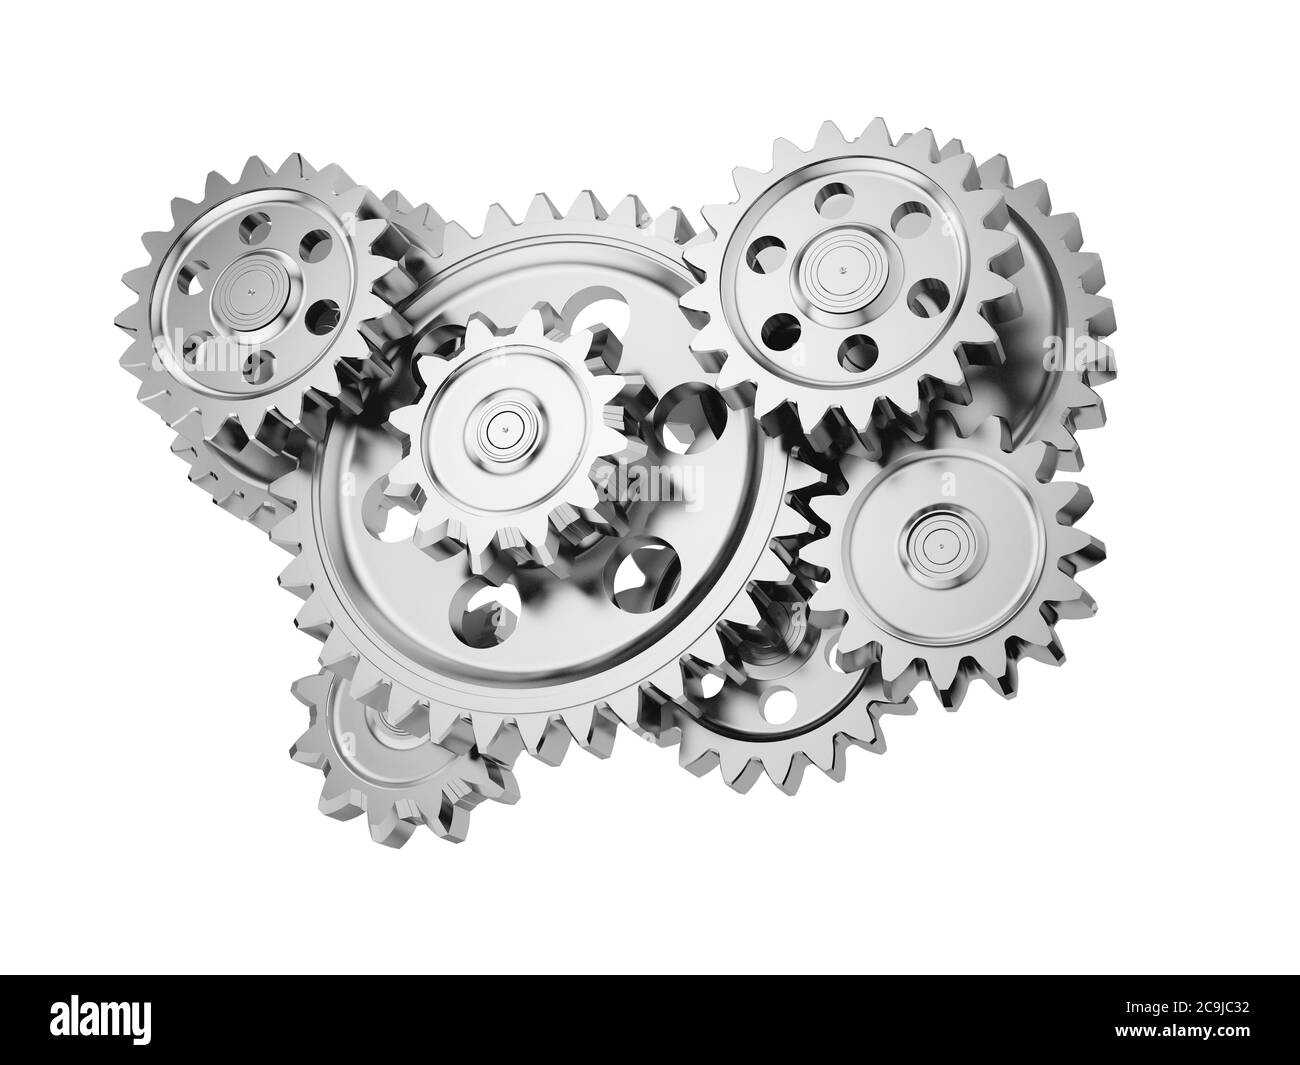 Steel gear wheels isolated on white background. 3d illustration. Stock Photo